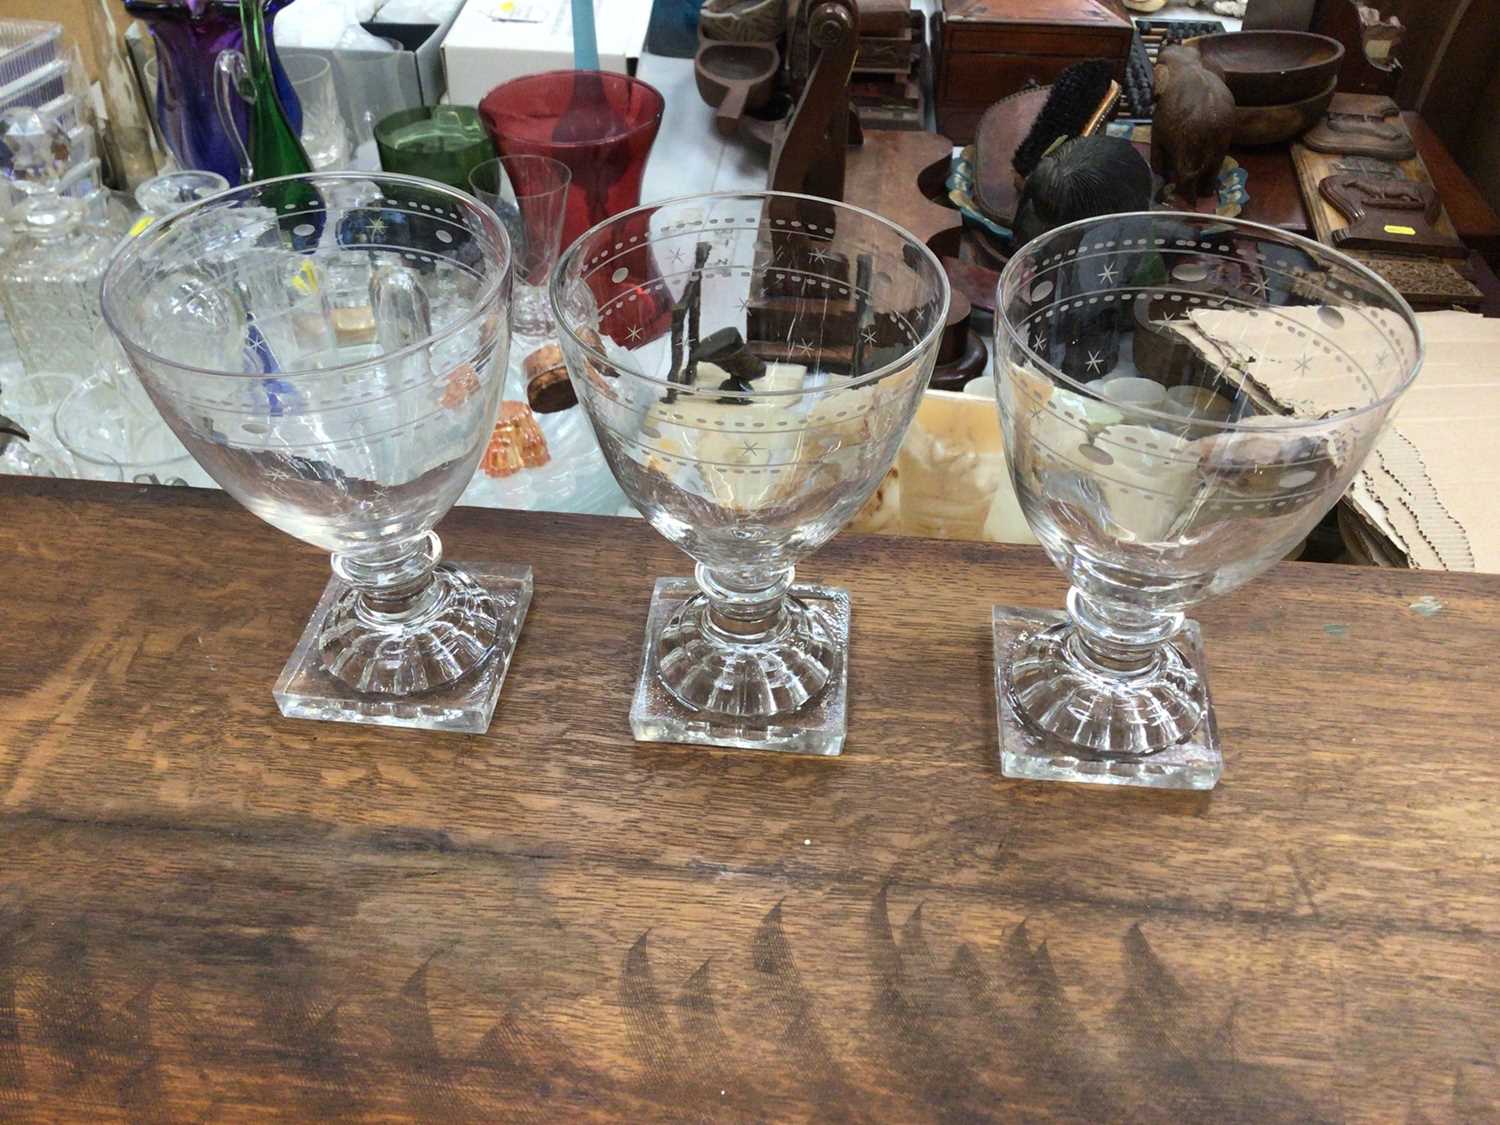 Lot 198 - Three 19th century glass rummers, with lemon squeezer bases, etched with a star and circle pattern